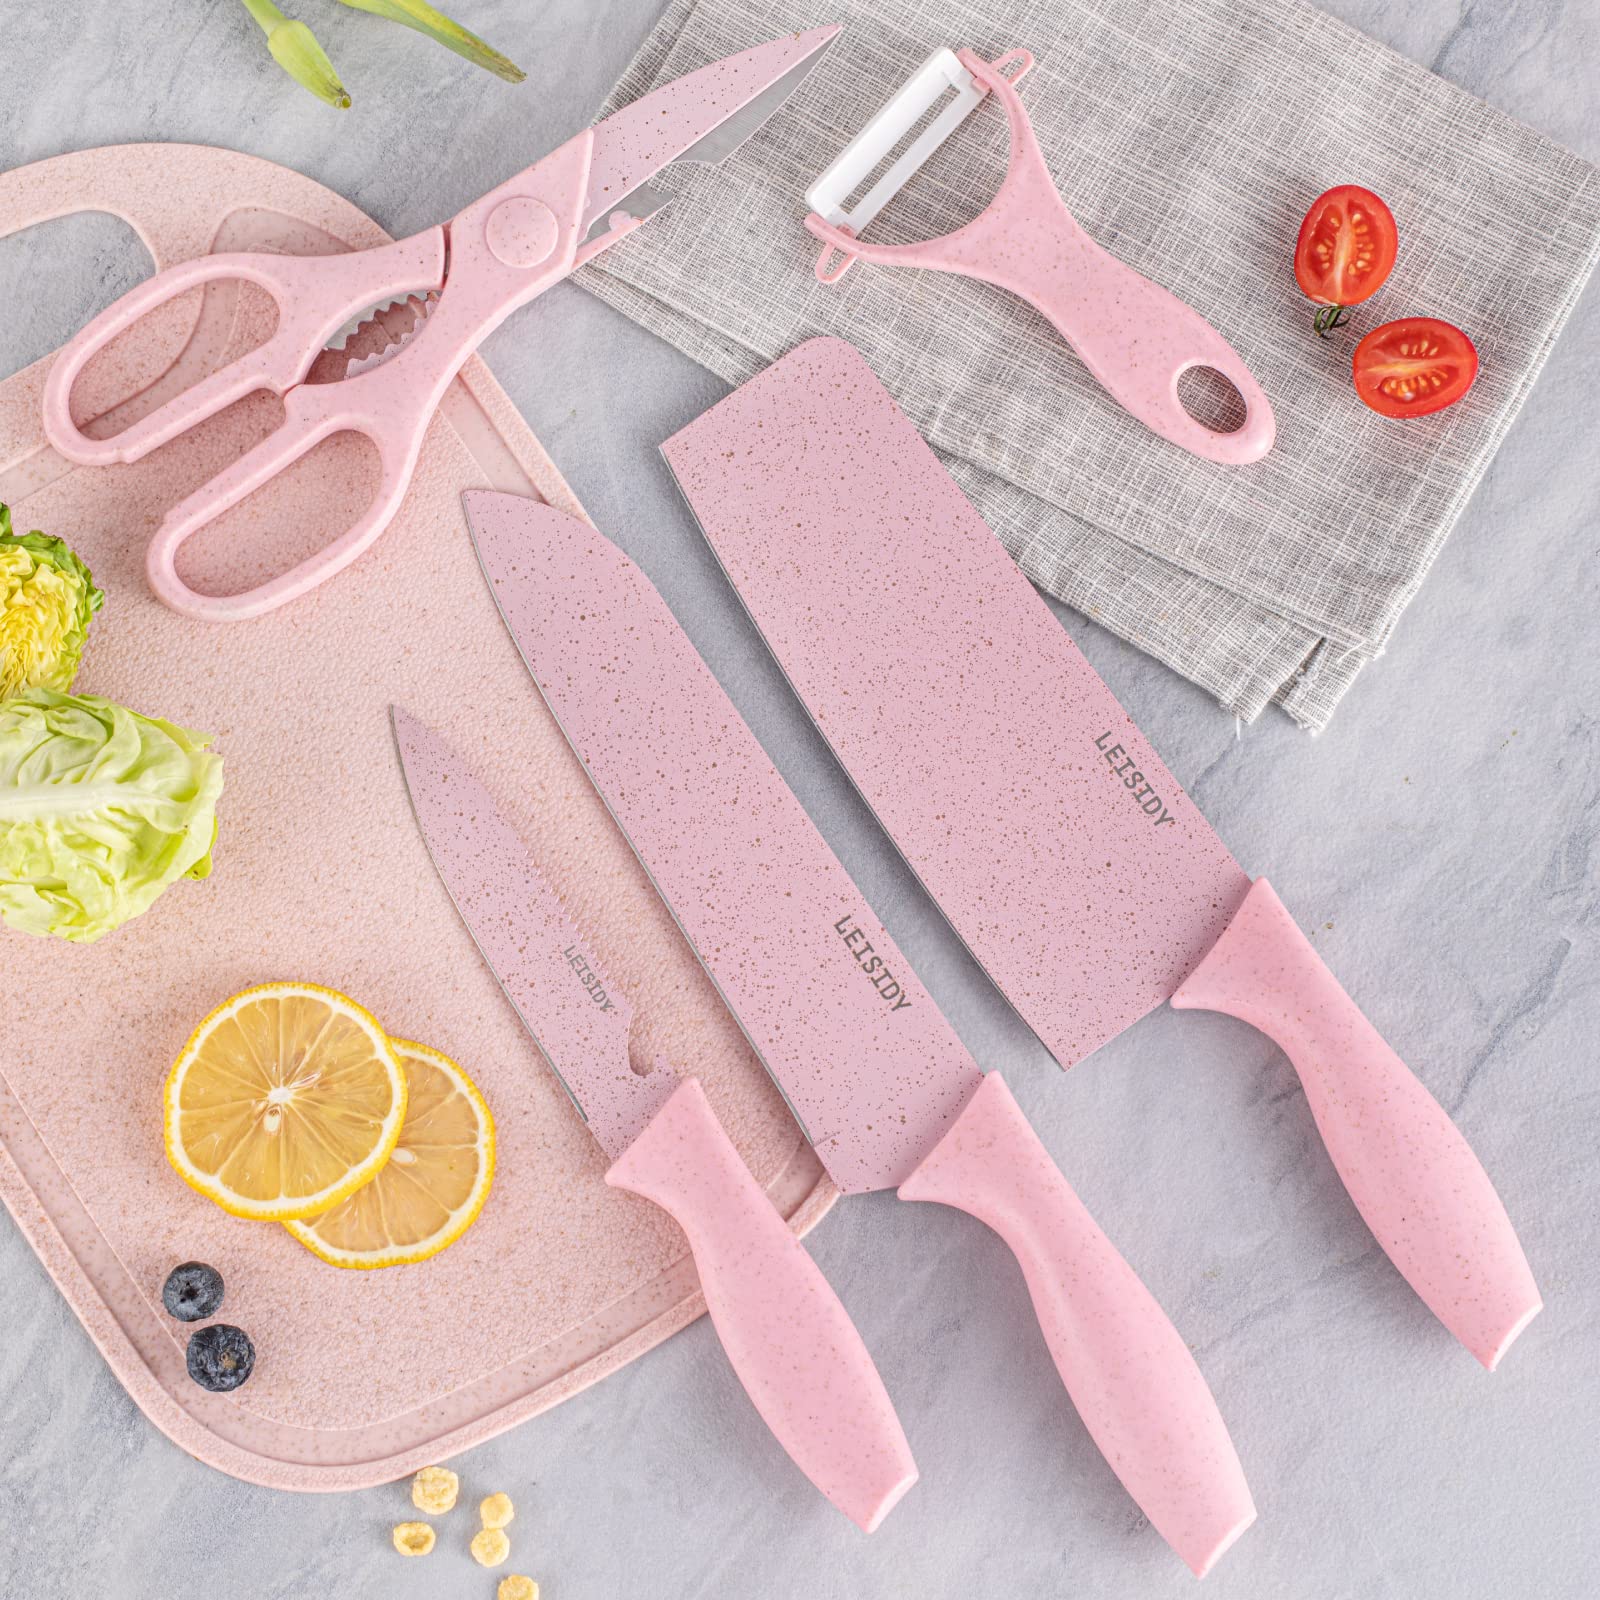 LEISIDY 7 Pieces of Pink Kitchen Knife Set - Non-stick Stainless Steel Kitchen Knives Set with 1 Scissor & 1 Peeler Stand and Chopping Board with Gift Box